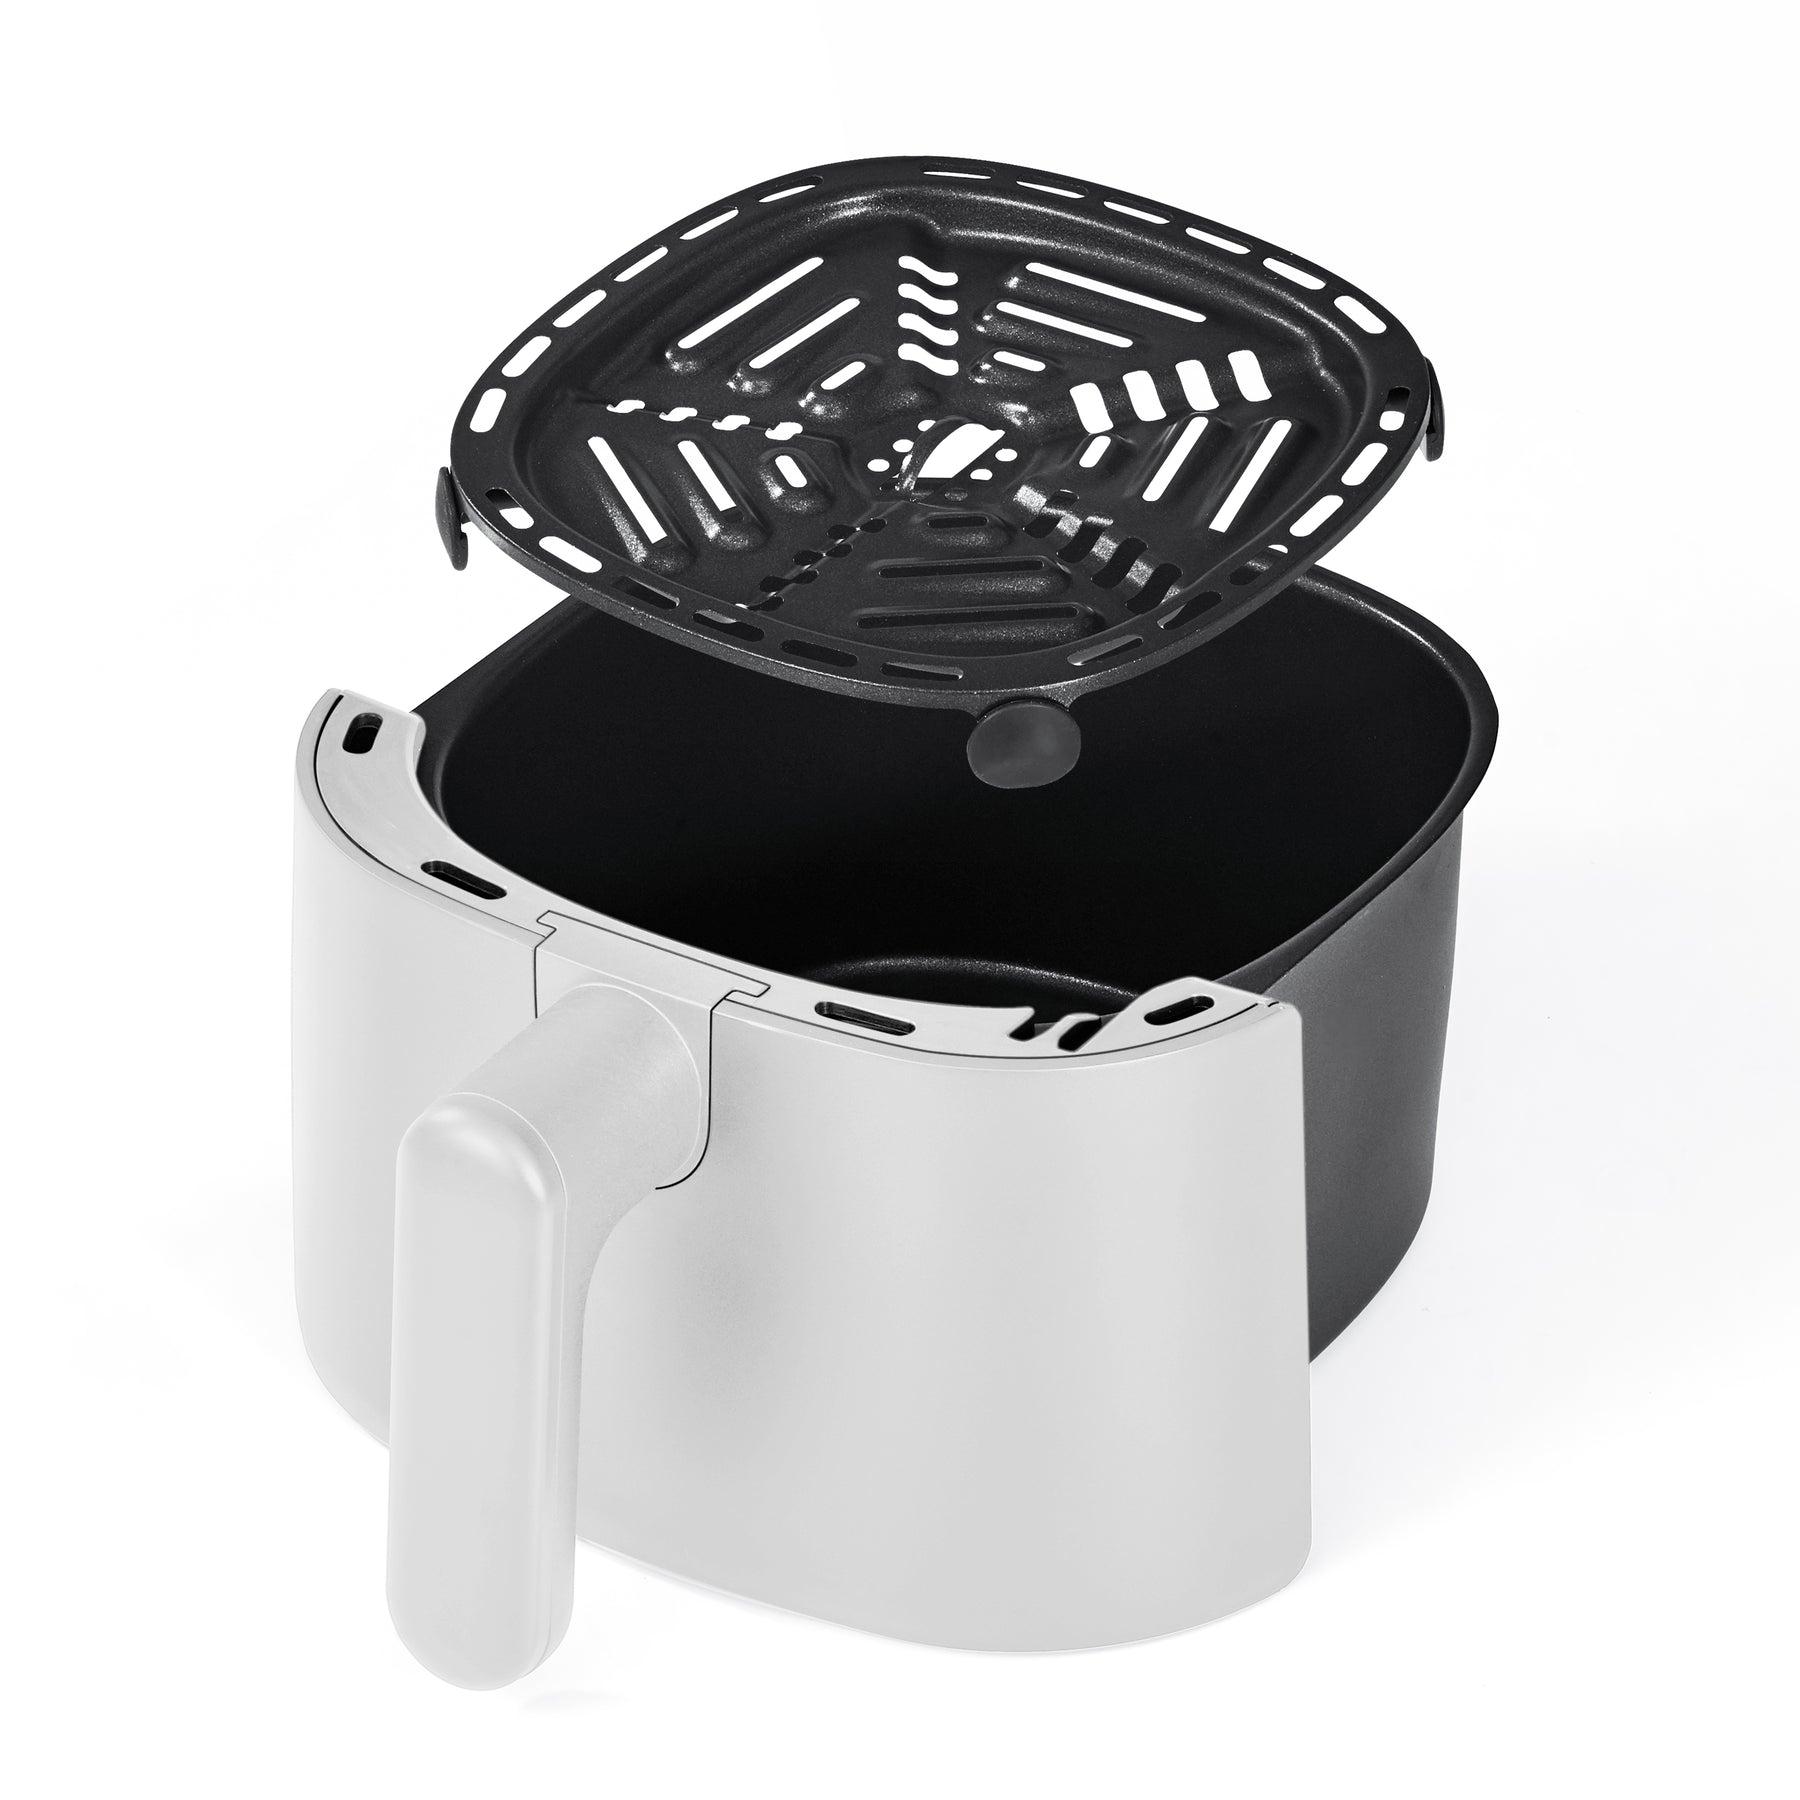 Excited to announce my Air Fryer collaboration with CRUX Kitchen ft.  TurboCrispTM Technology available exclusively at Best Buy, By marshmello